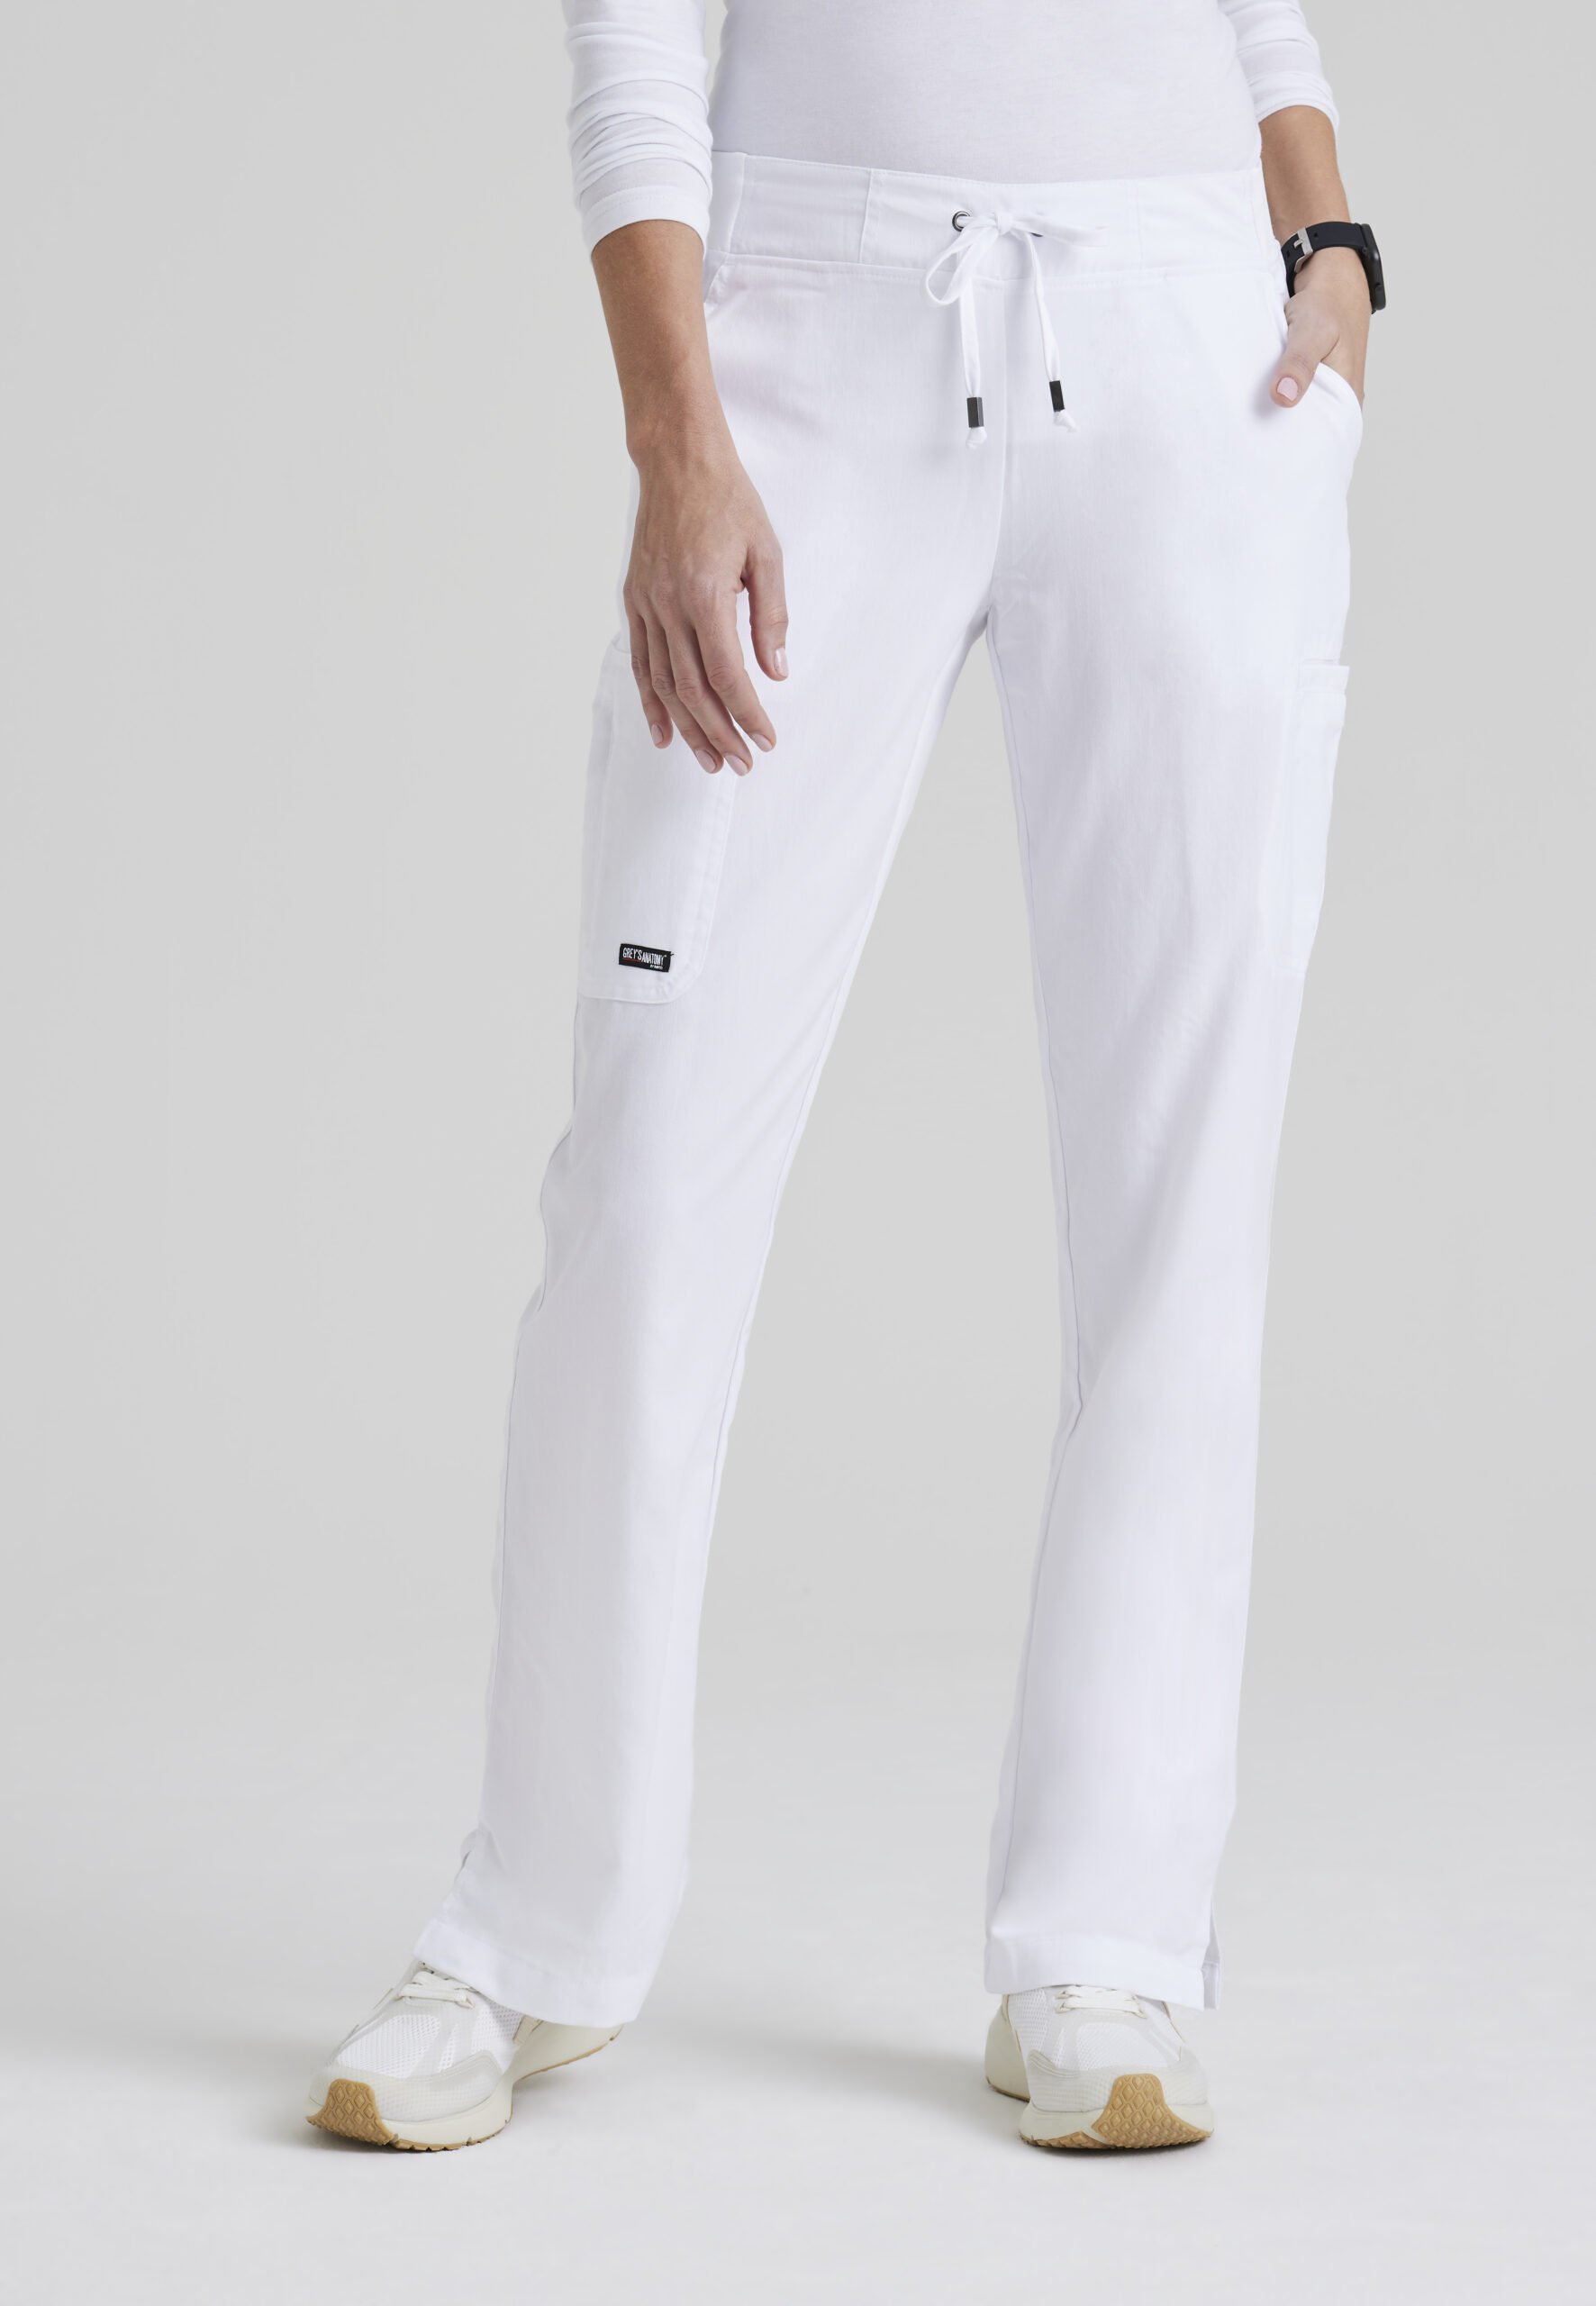 Med Couture Scrub Pants Activate Clearance